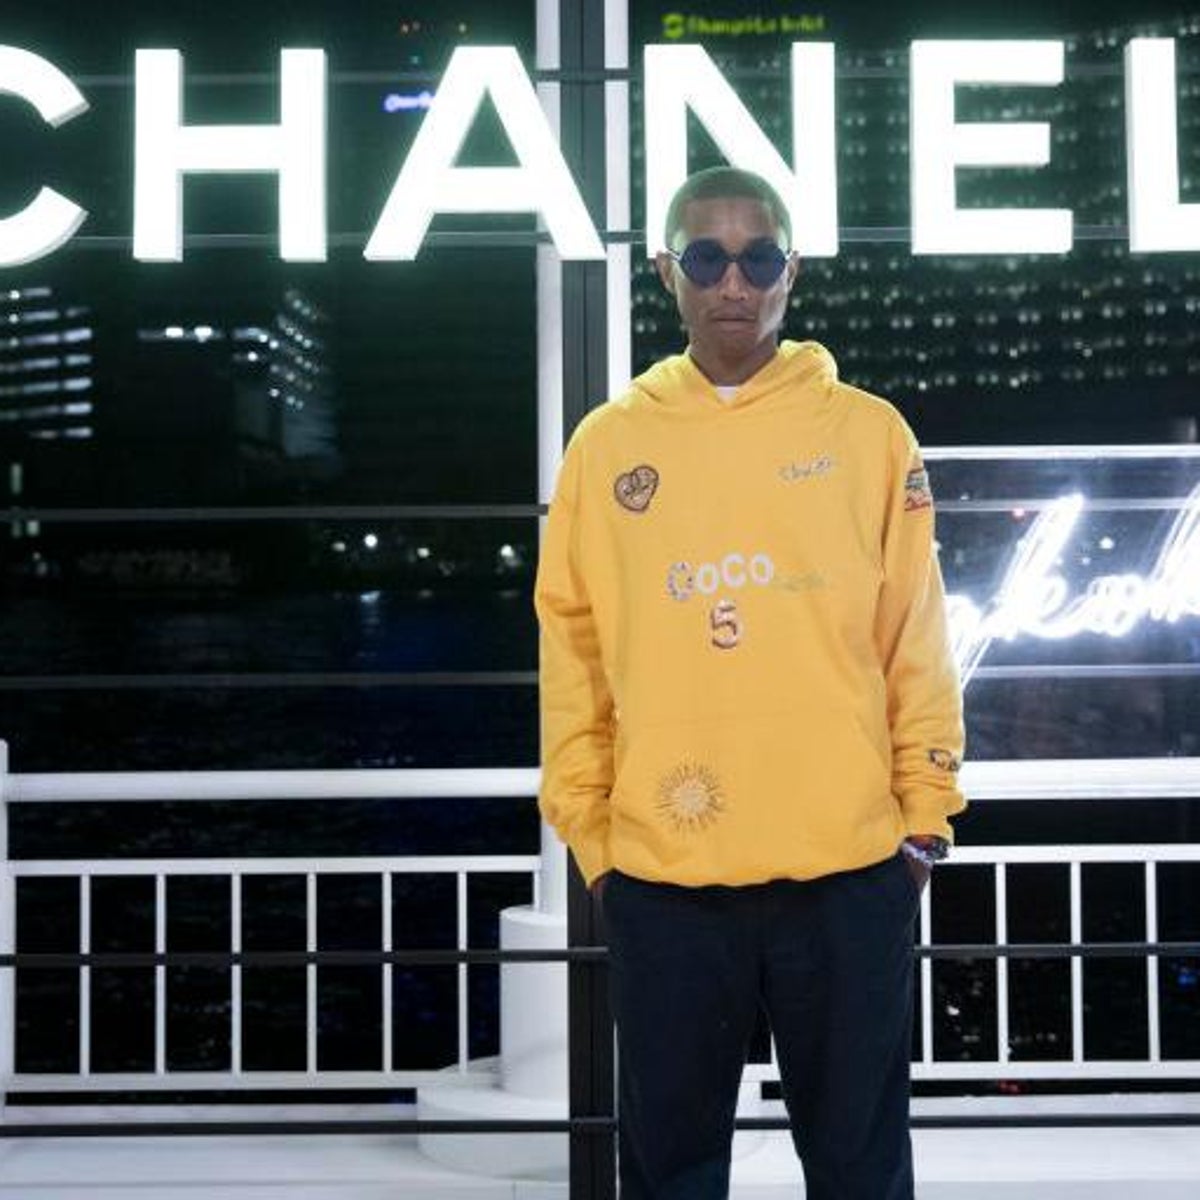 pharrell williams and chanel